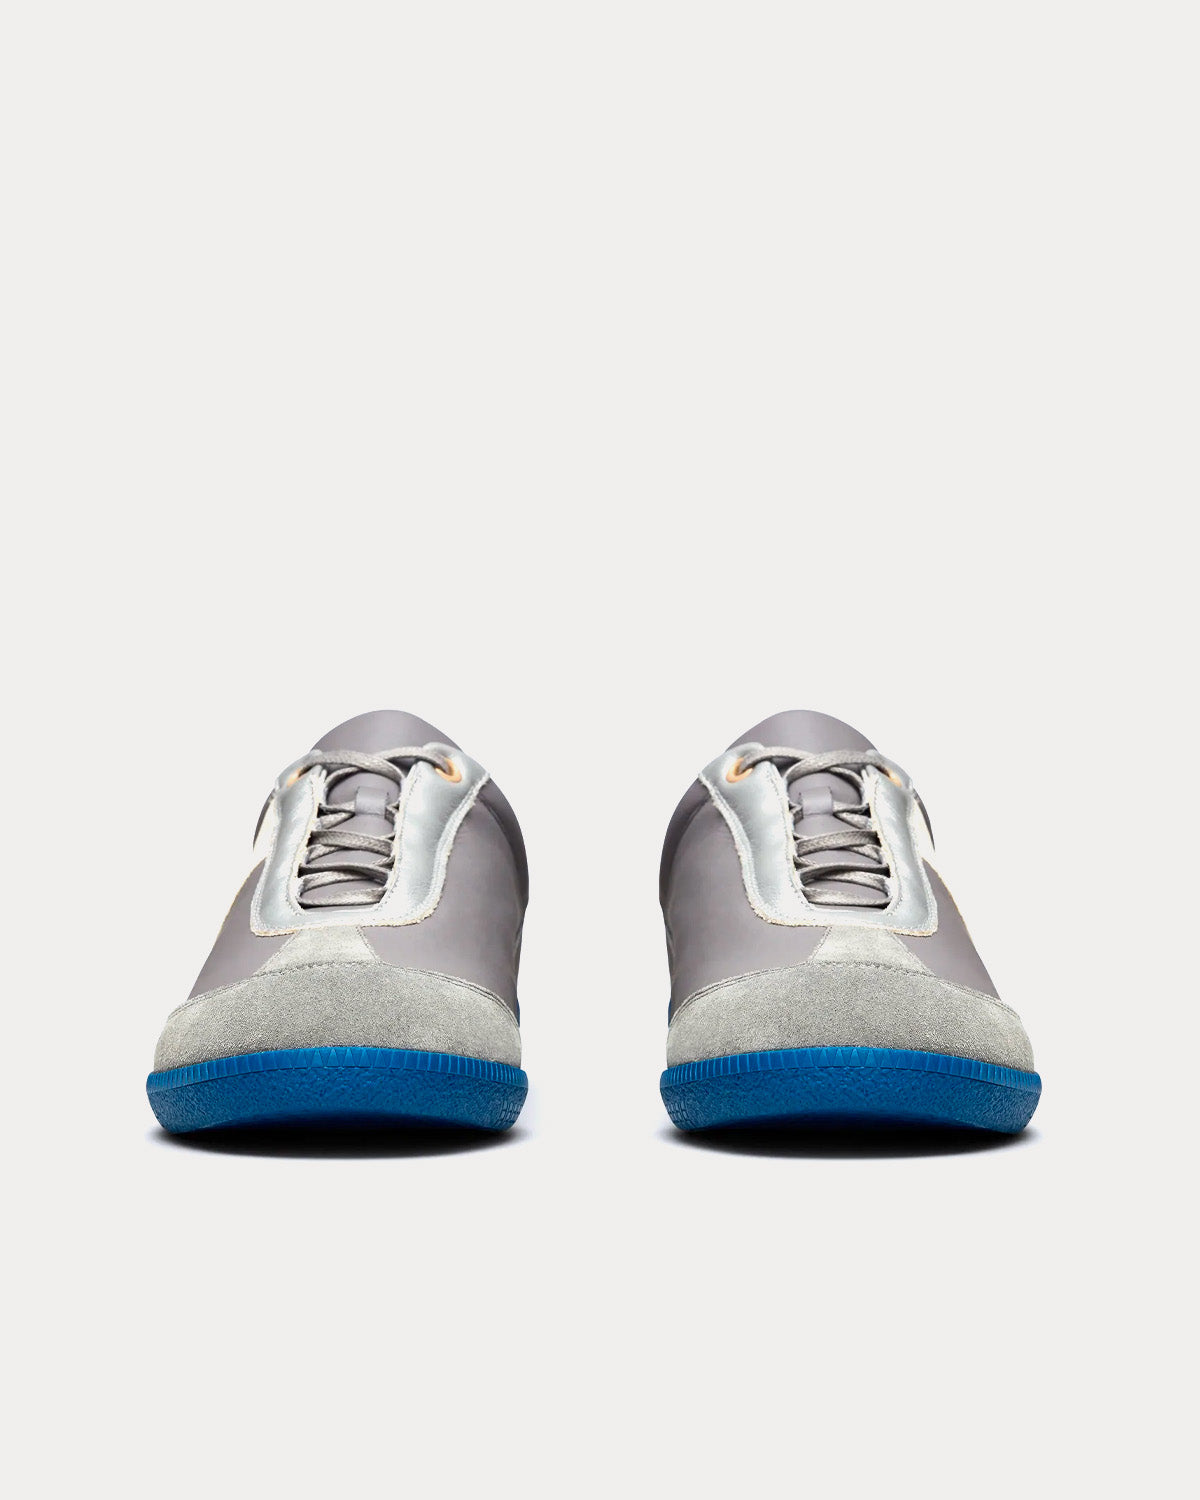 A-COLD-WALL* Shard Track Mid Grey Low Top Sneakers - Sneak in Peace